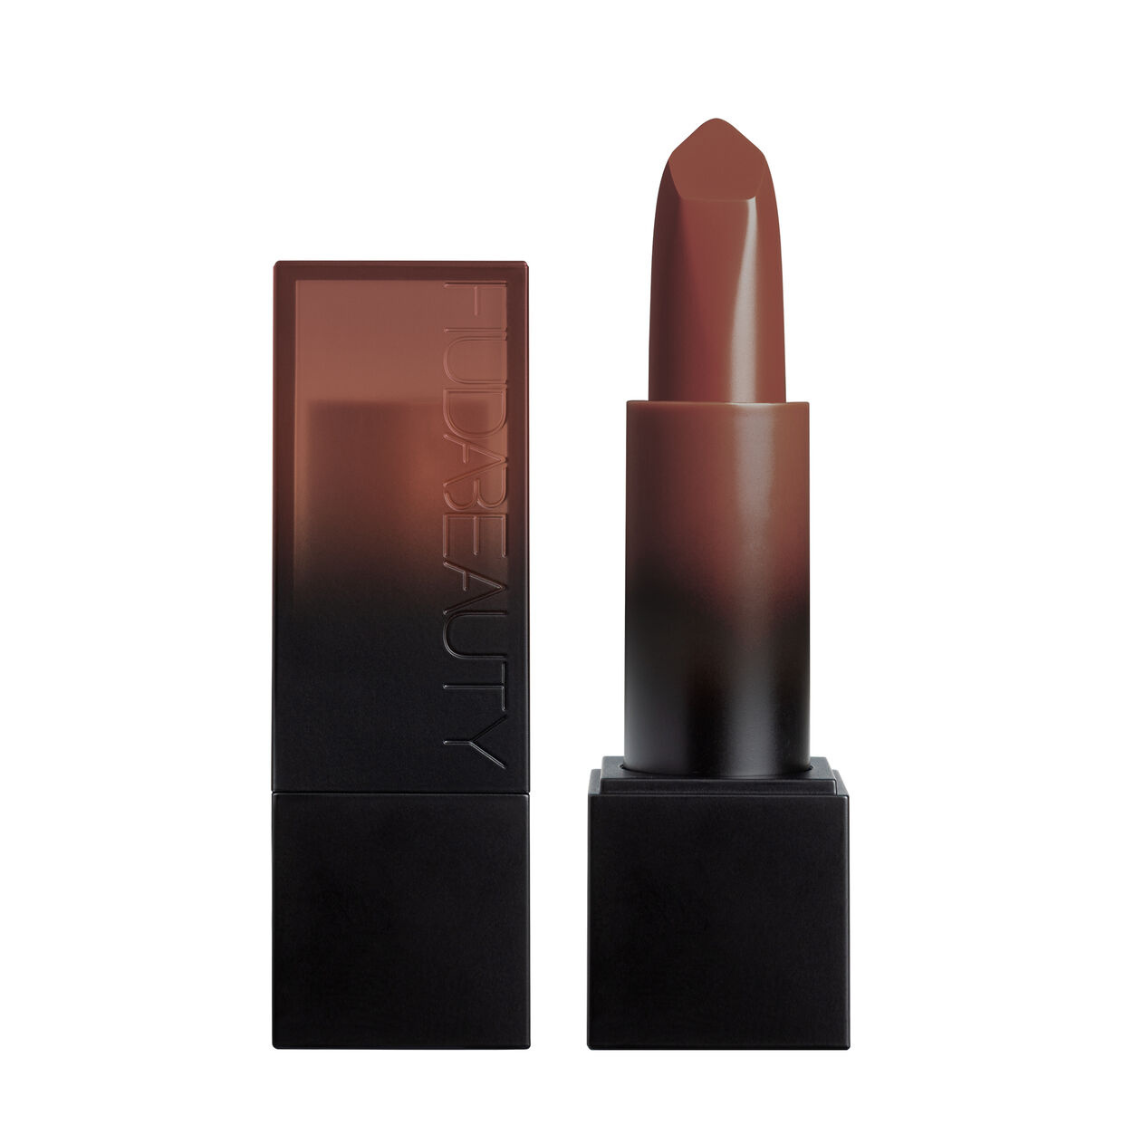 Lipstick in a brown shade on white background. The lipstick can be used to create a soft goth look.